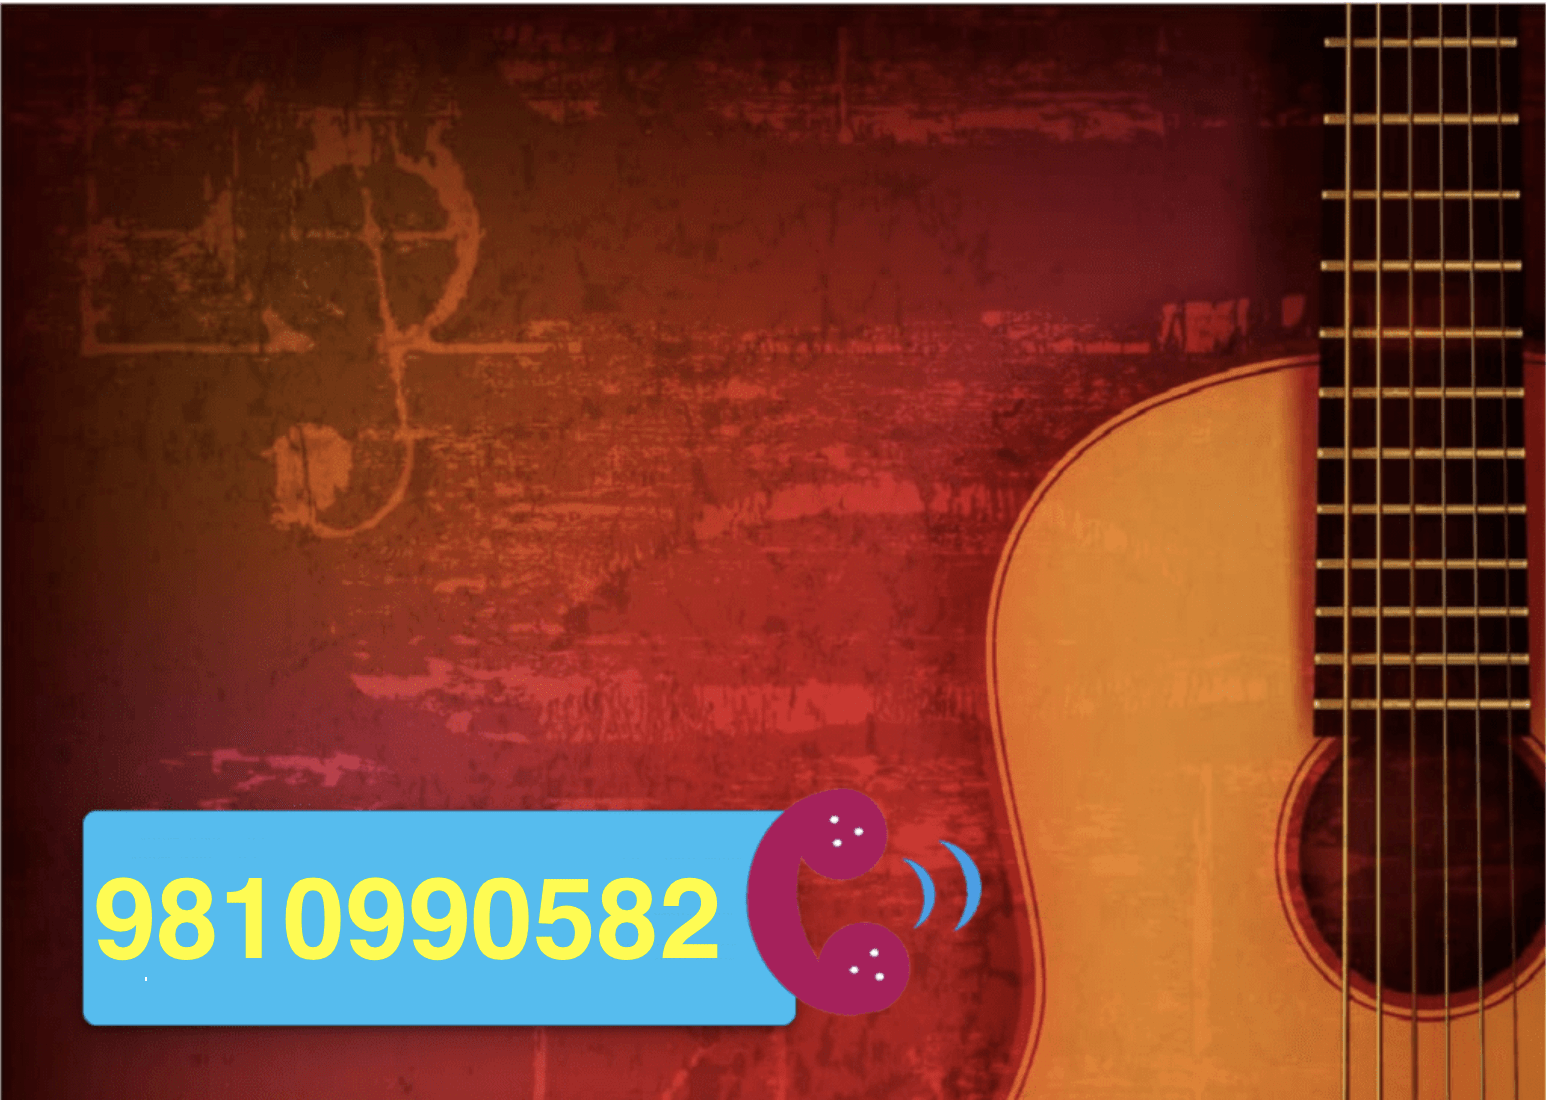 Call us now for Guitar Piano Violin Singing Classes